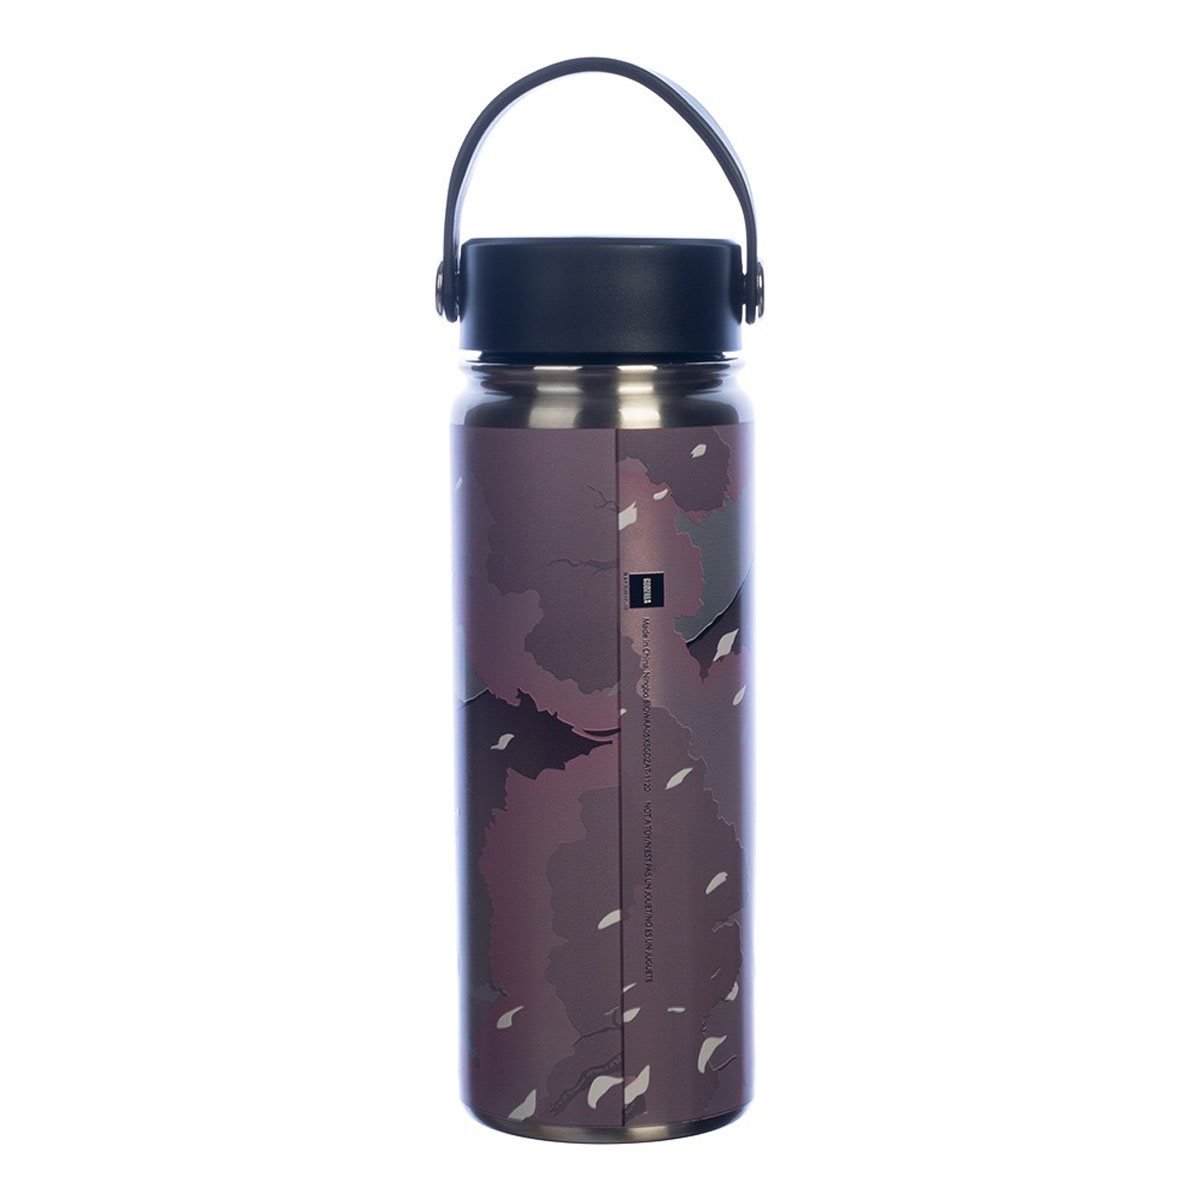  Kirby Character & Logo 17 Oz Stainless Steel Water Bottle